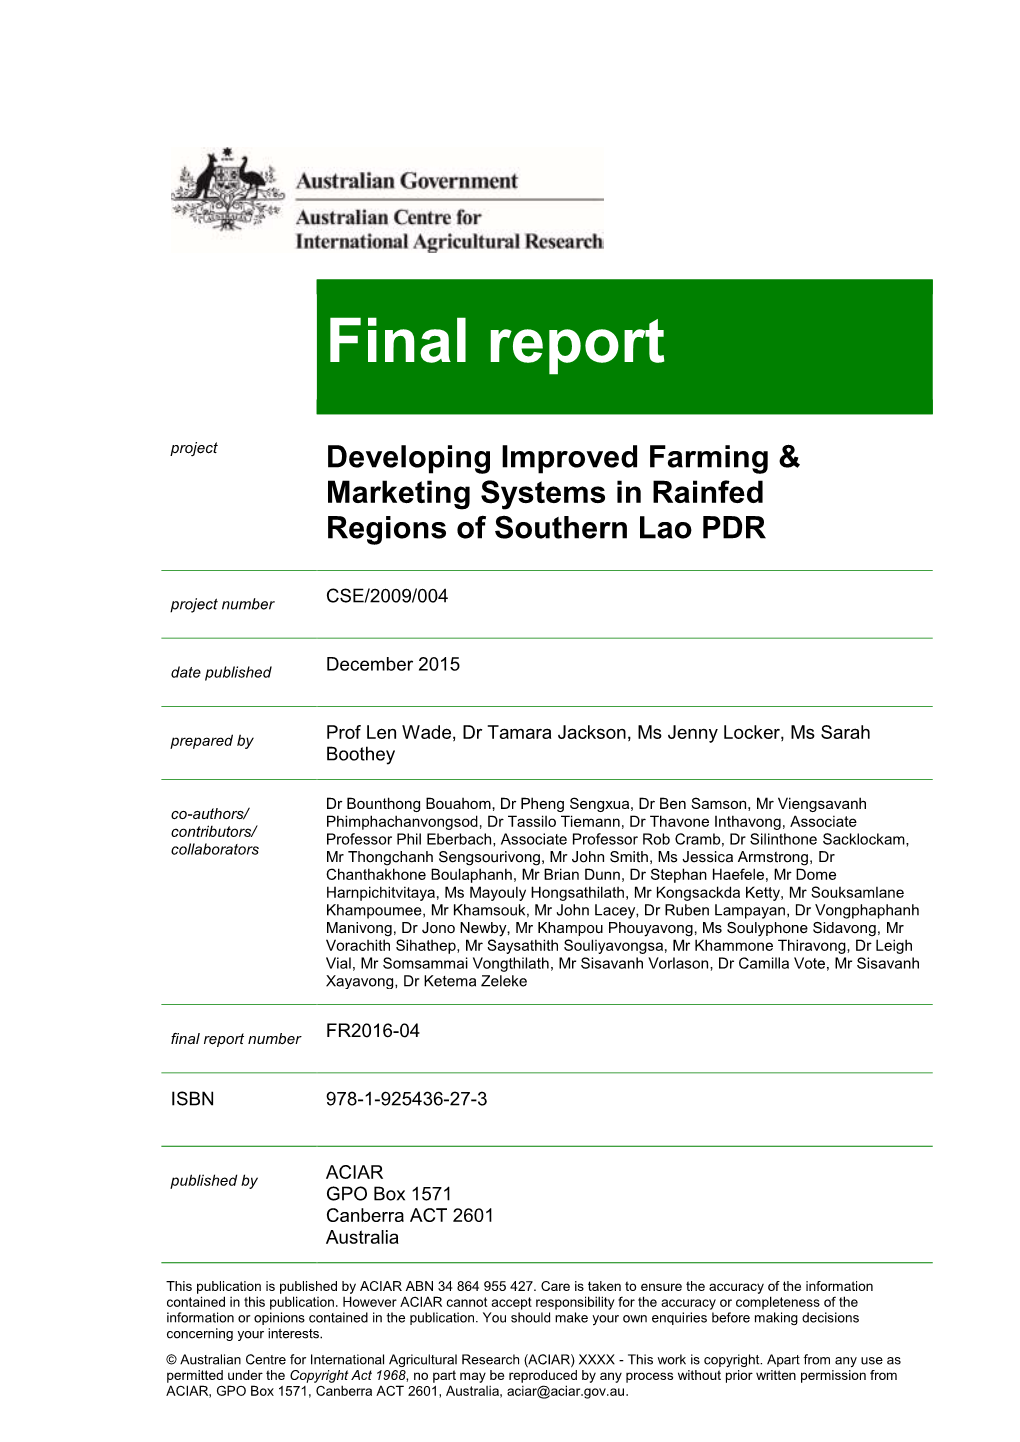 Final Report Project Developing Improved Farming & Marketing Systems in Rainfed Regions of Southern Lao PDR